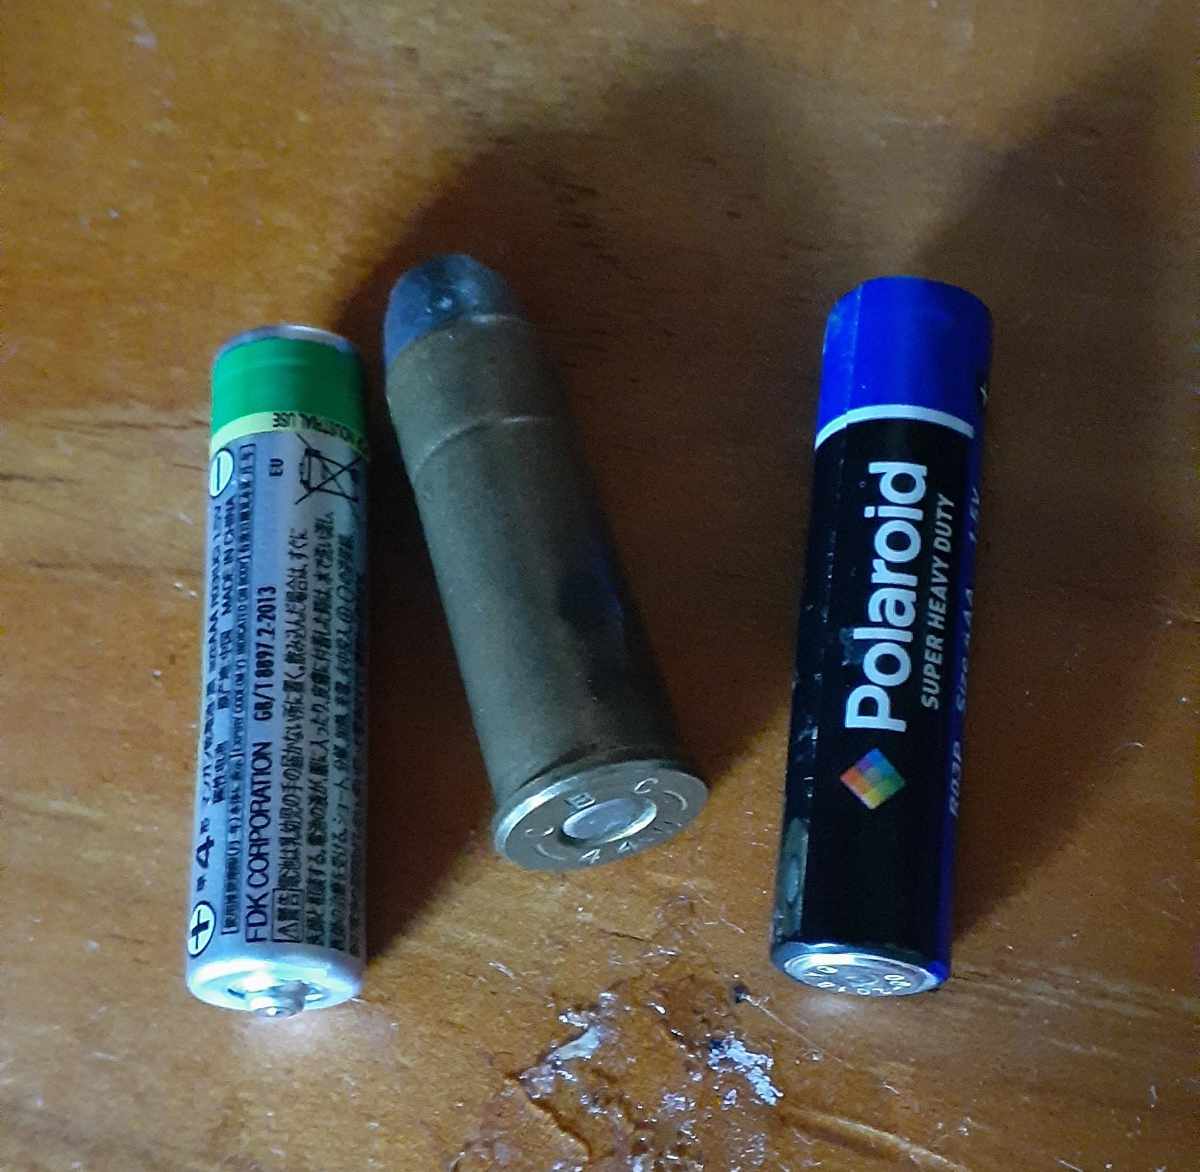 My Nanna needed help fixing her remote. I asked her to grab some batteries, and she came back with these